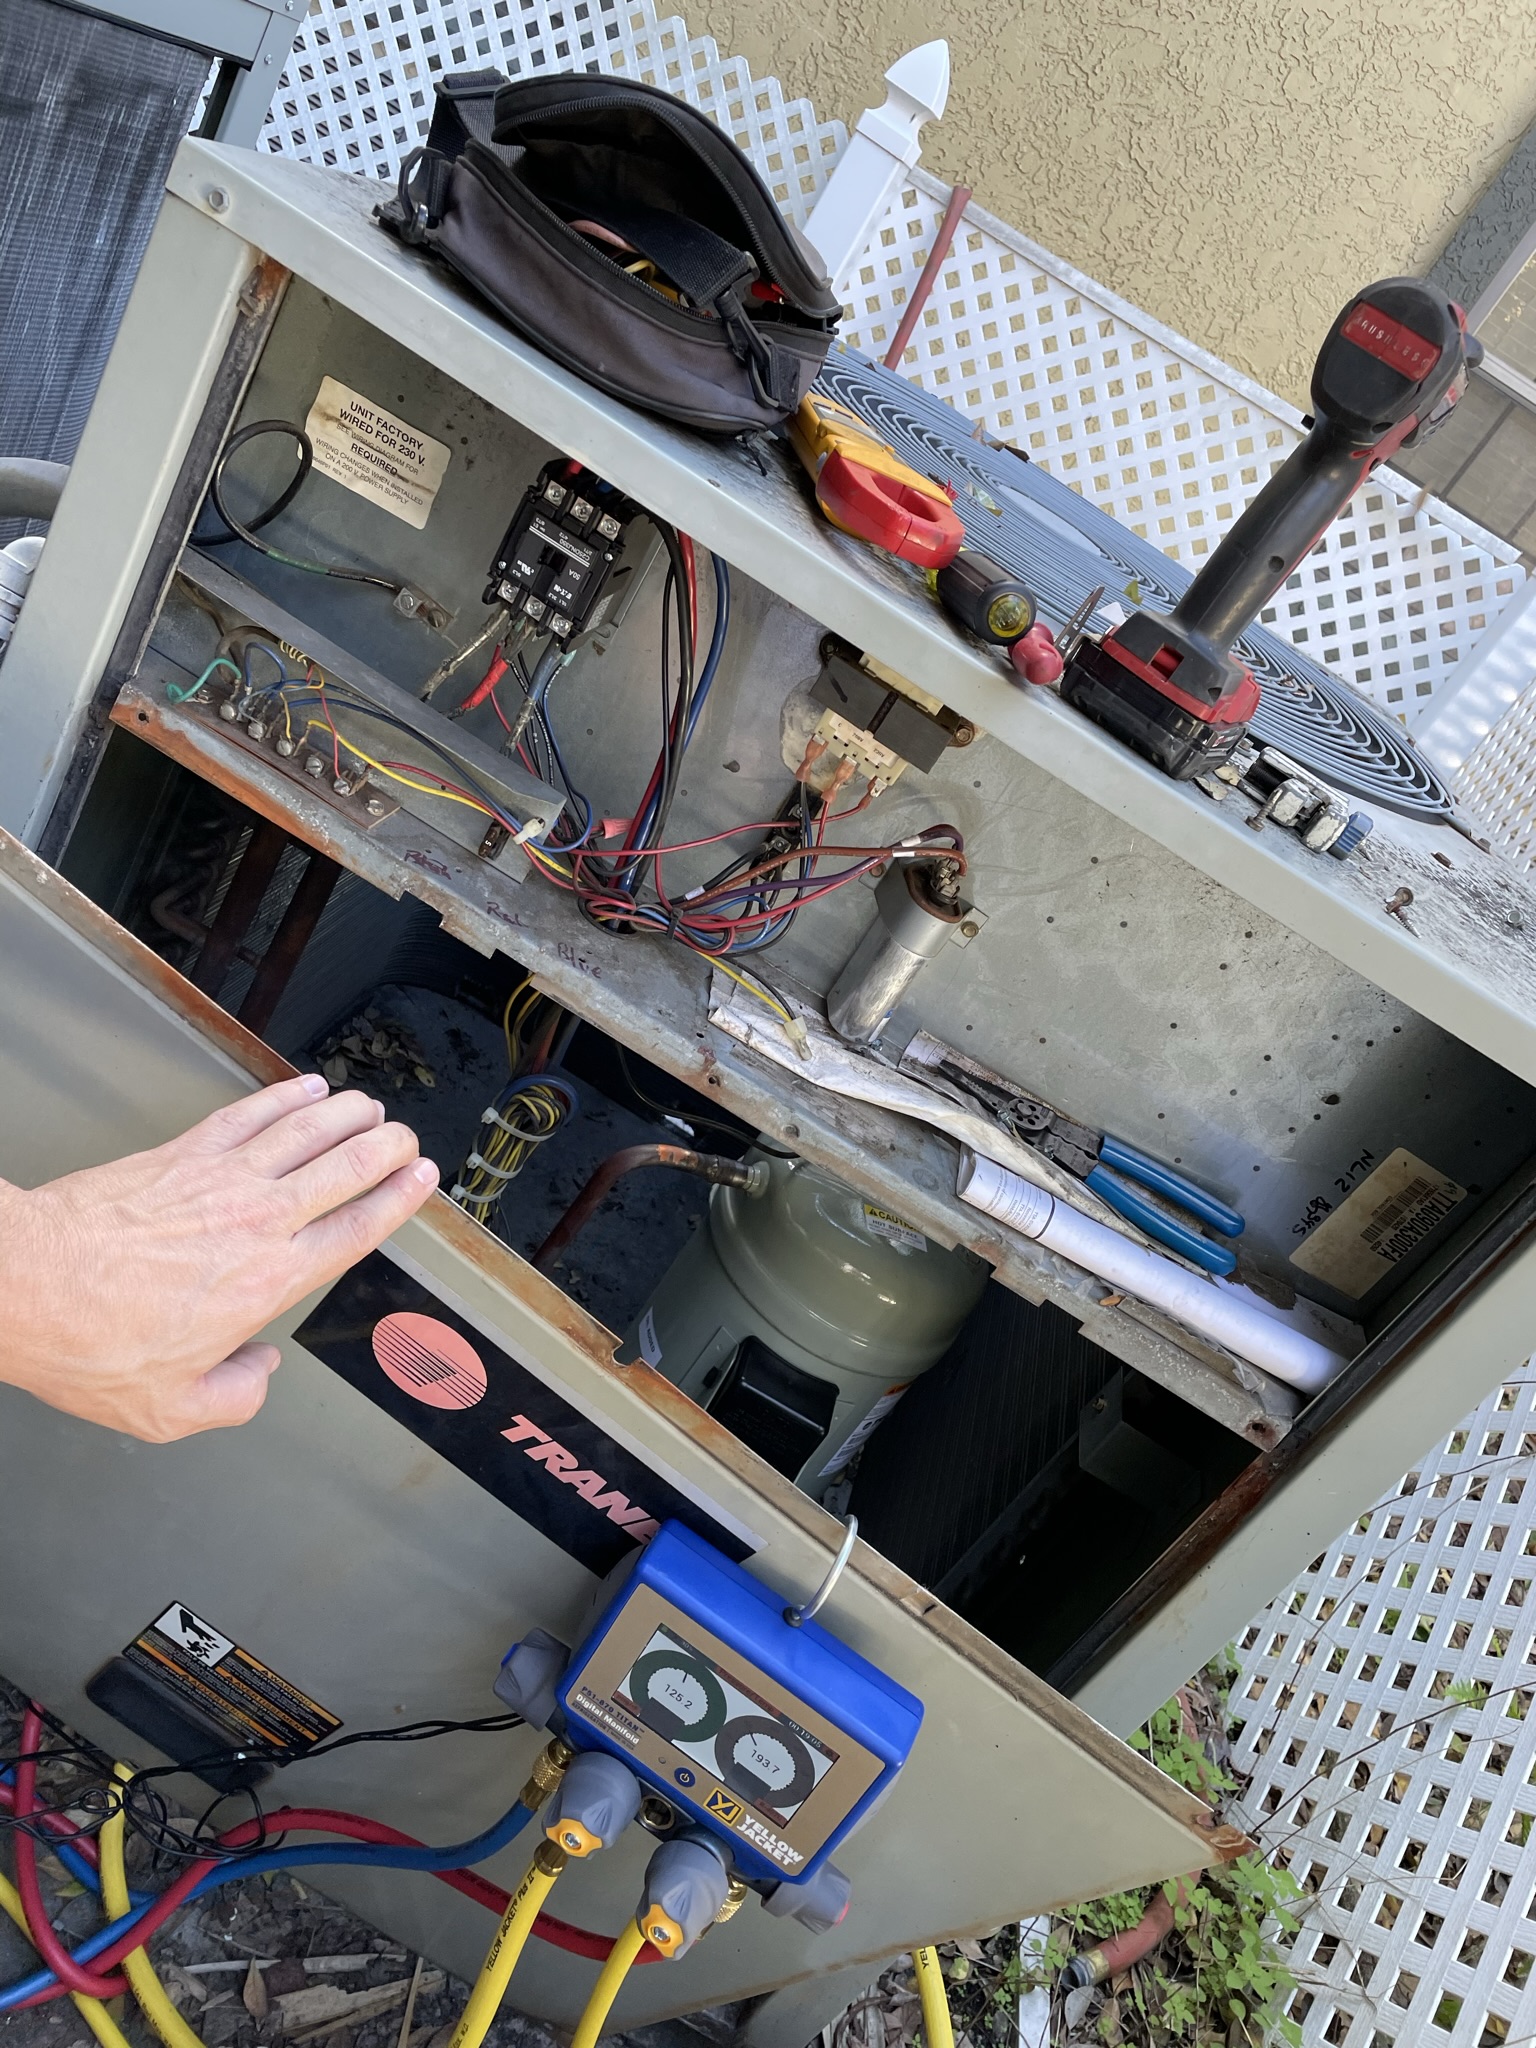 10 Signs Your Air Conditioner Needs Repair